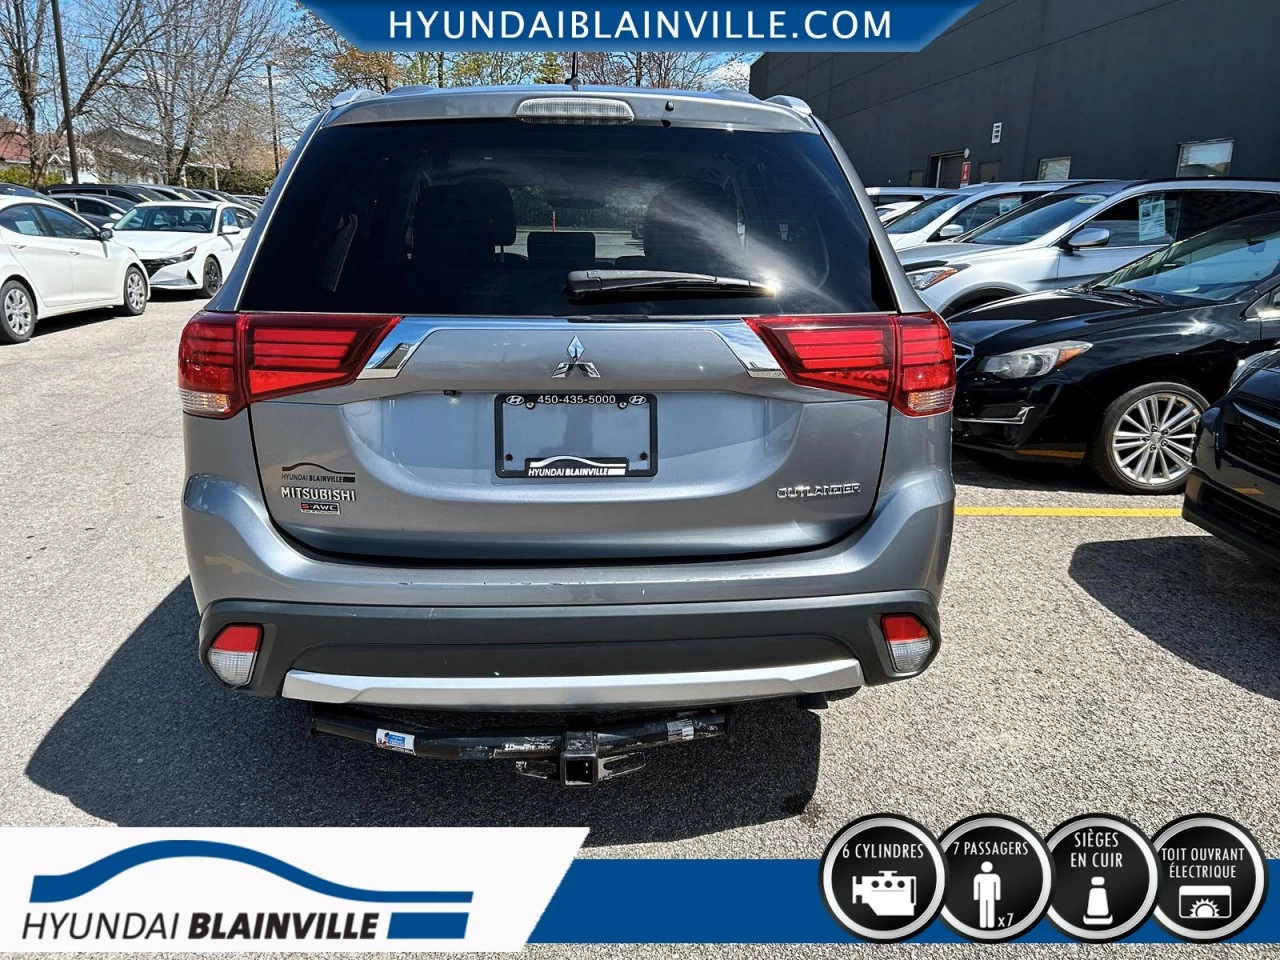 2016 Mitsubishi Outlander GT, V6, AWD, 7 PASSAGERS, CUIR, TOIT OUVRANT+ Image principale